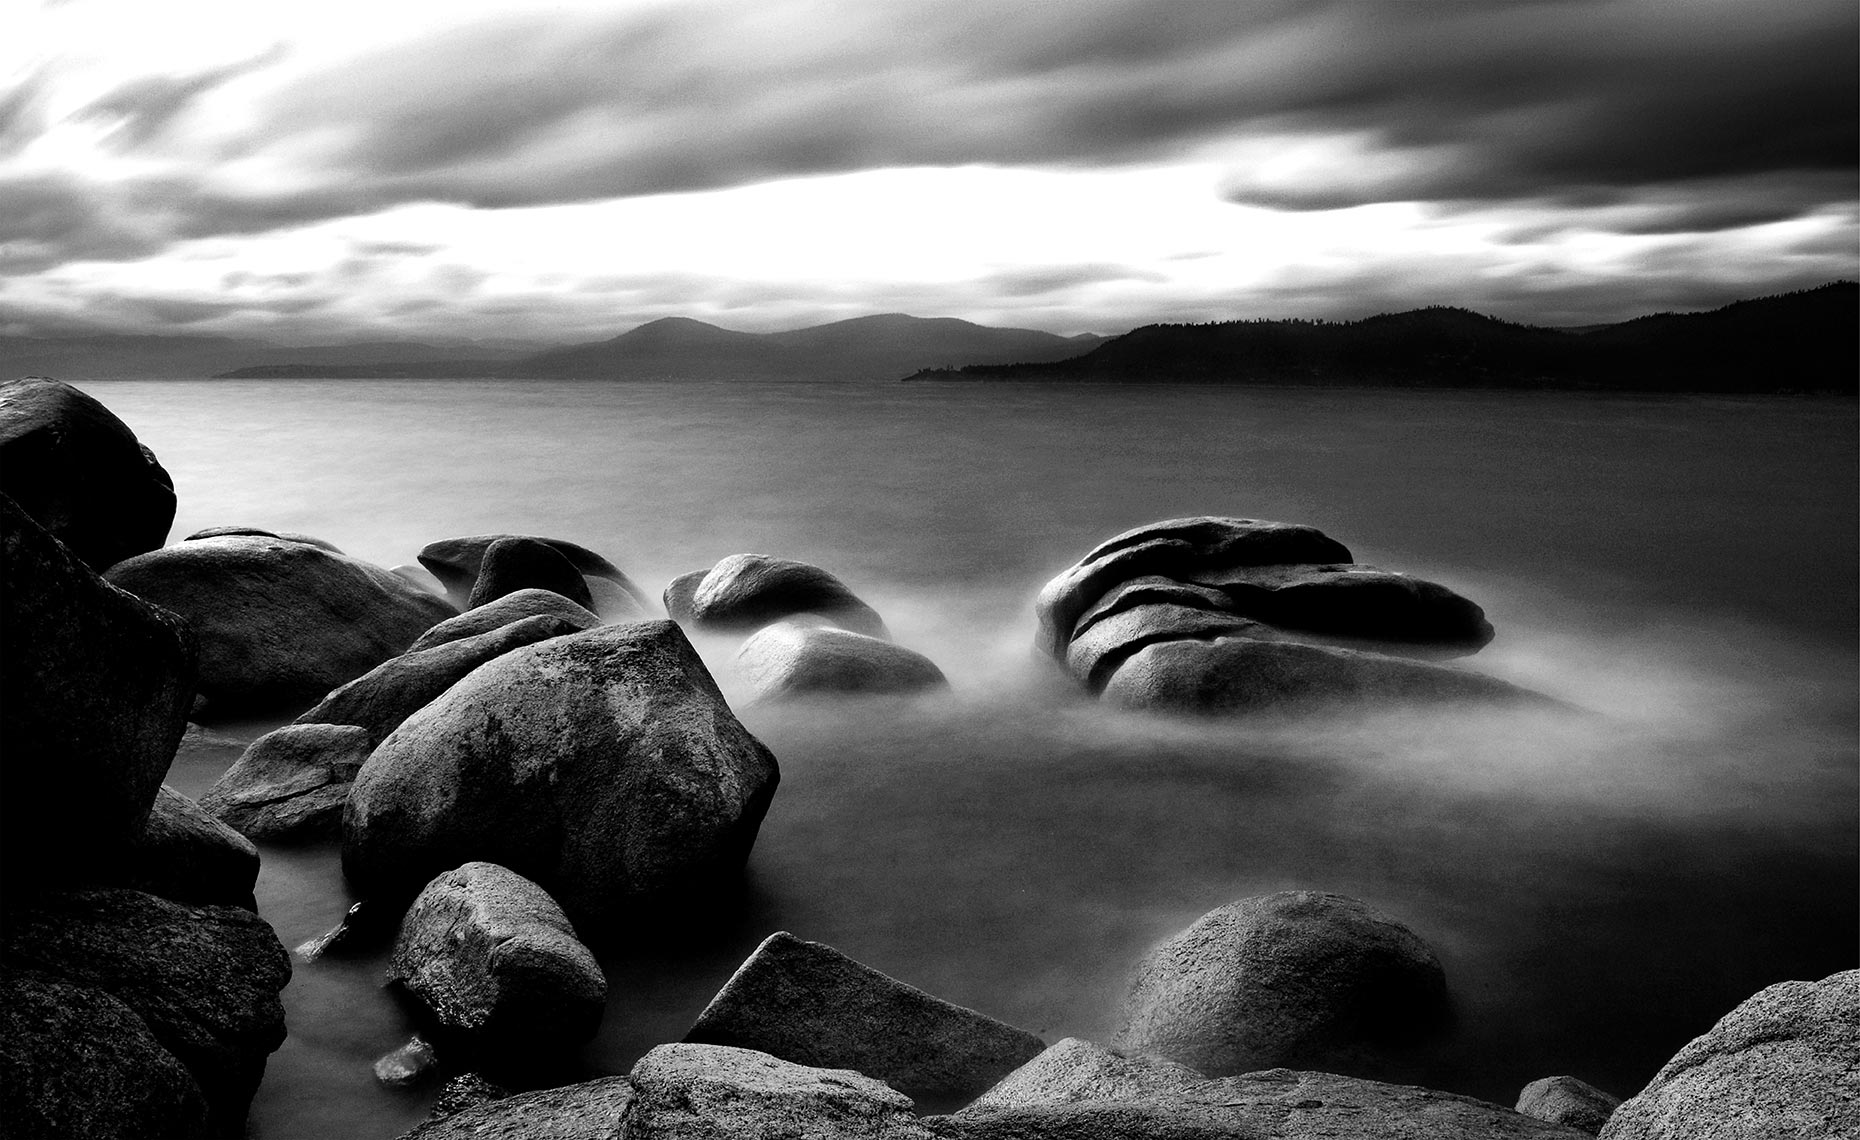 09_Skunk_Harbor_North_Lake_Tahoe__California_Black_and_White_Environment_Landscape_Chris_Wellhausen_Photography.JPG